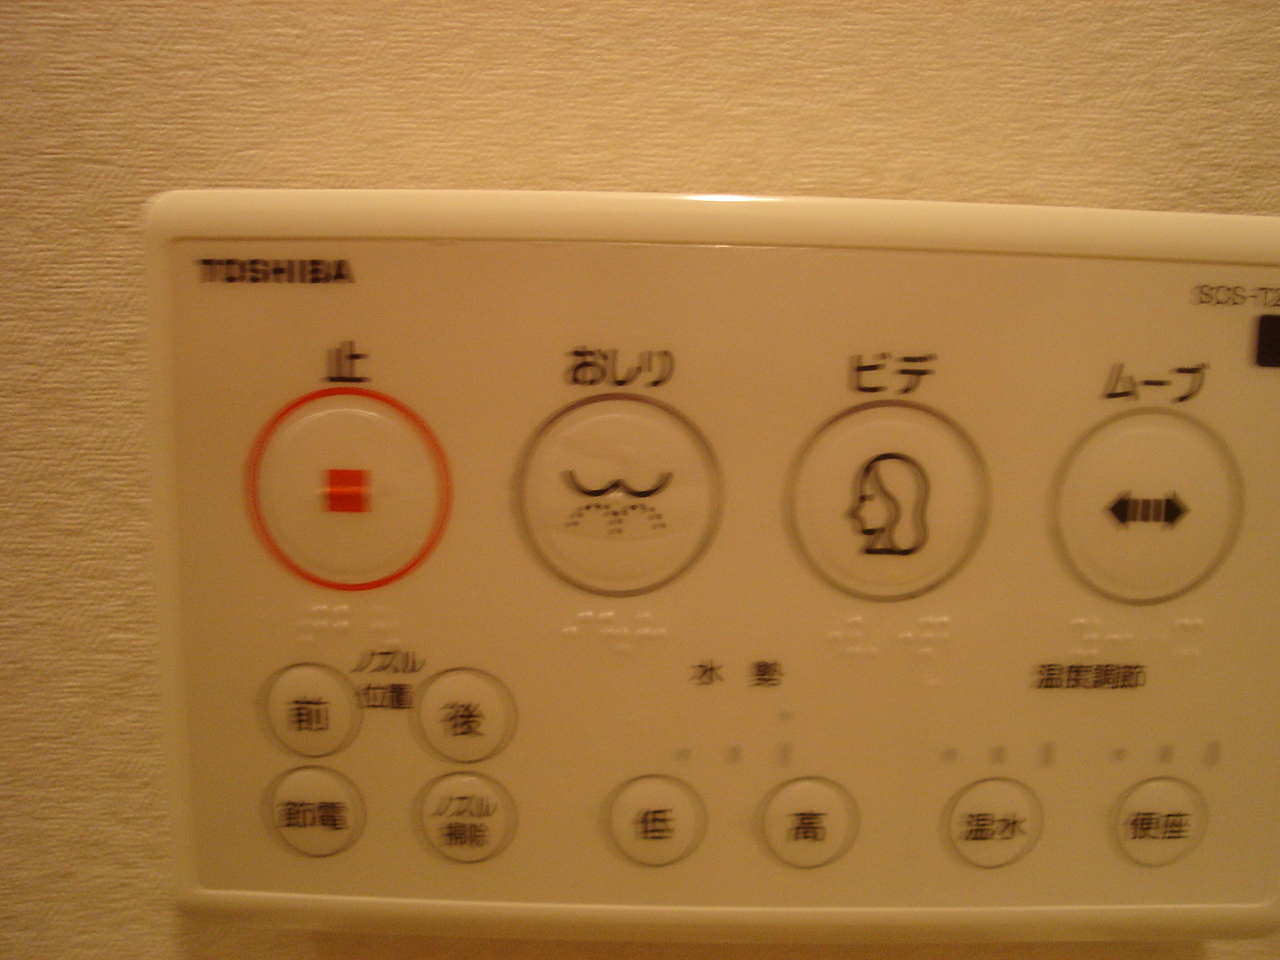 Other Equipment. Washlet is a panel of.